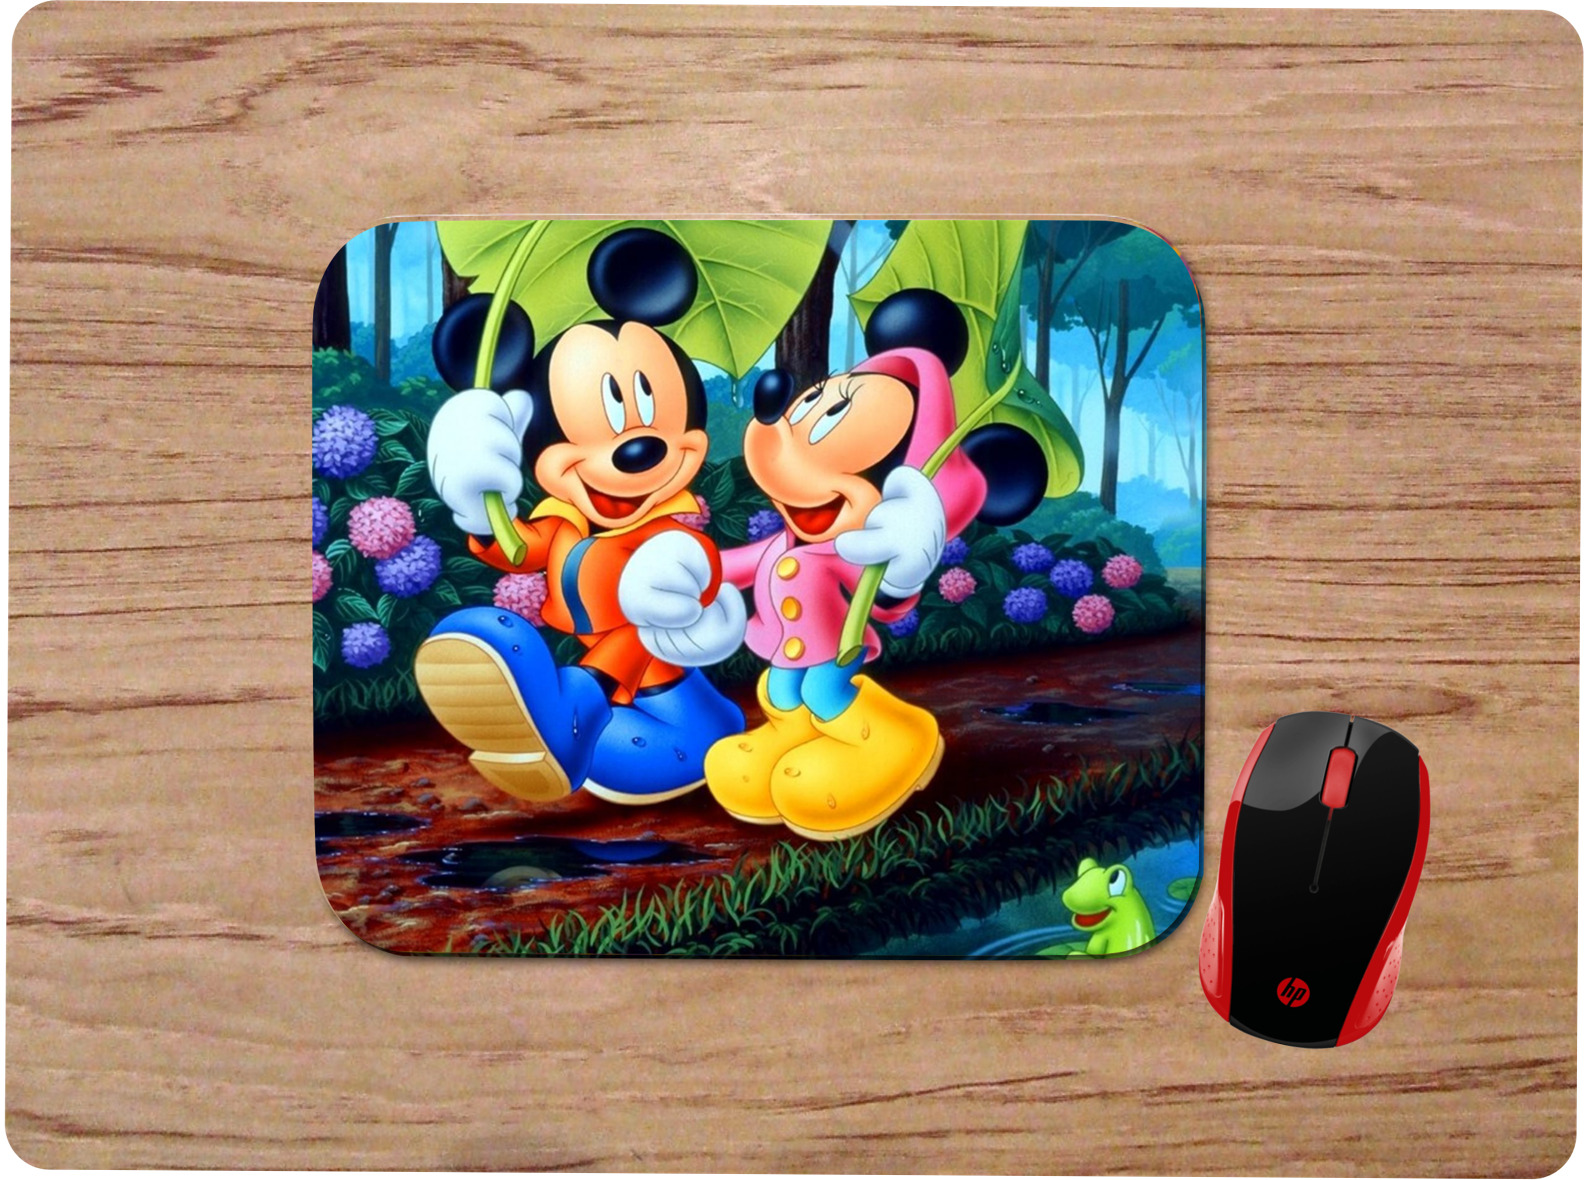 MICKEY & MINNIE MOUSE WALKING IN THE RAIN ART DESIGN MOUSE PAD DESK MAT GIFT